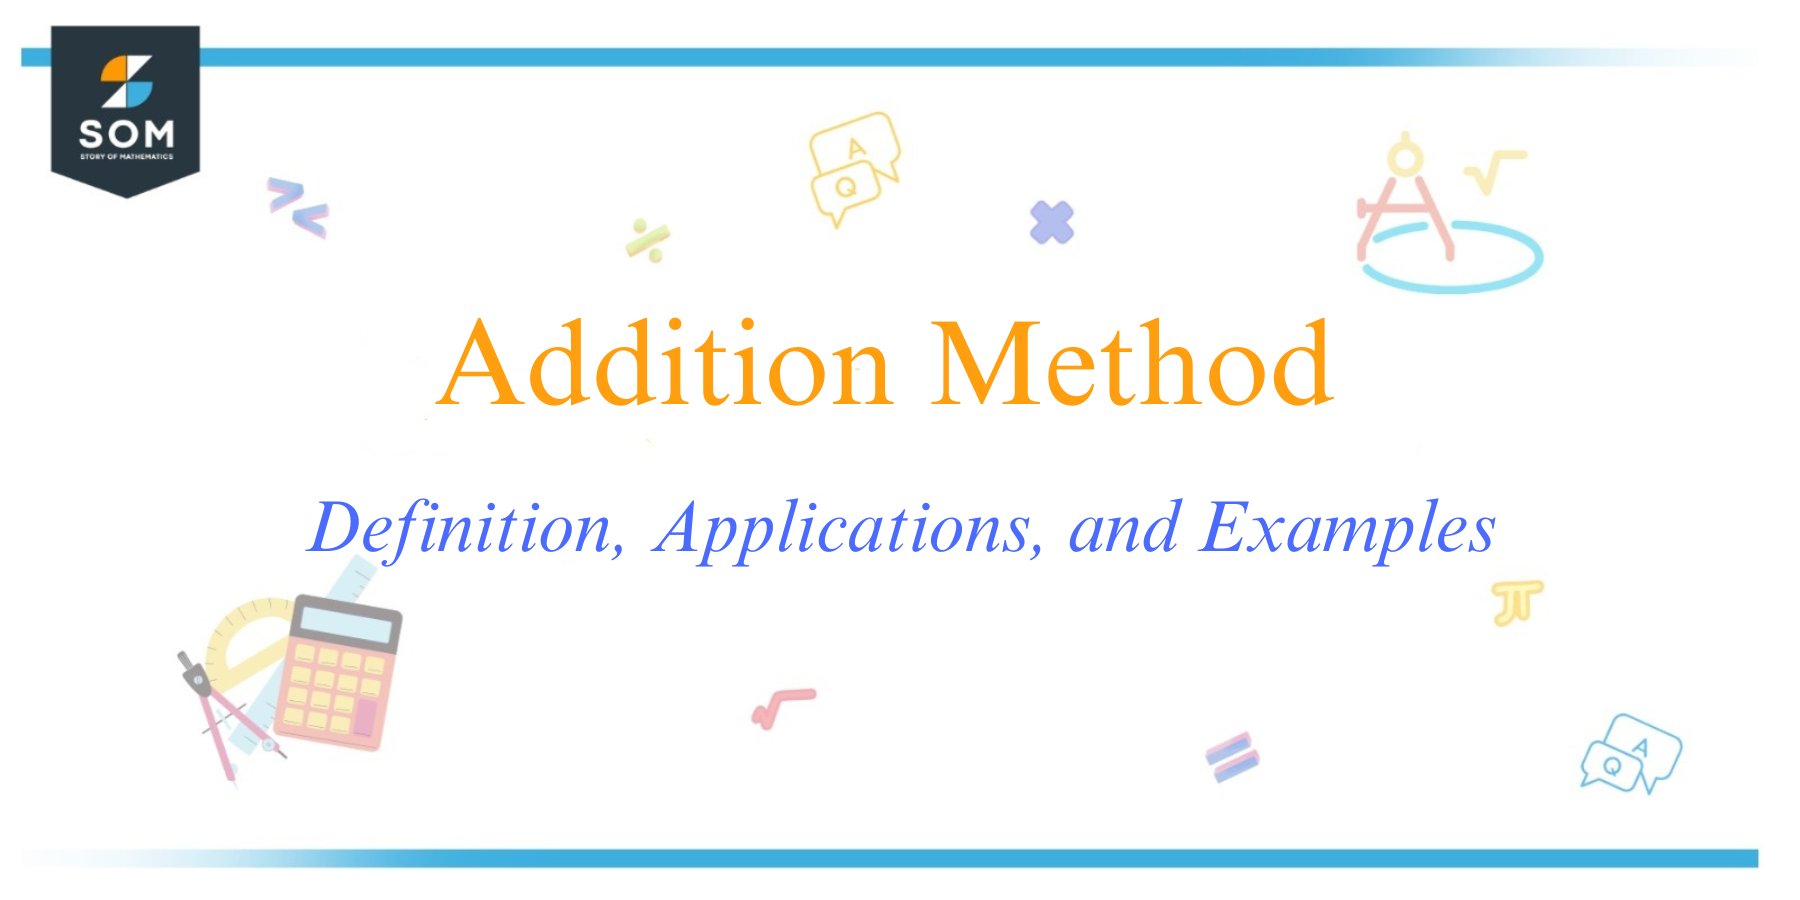 Addition Method Definition Applications and